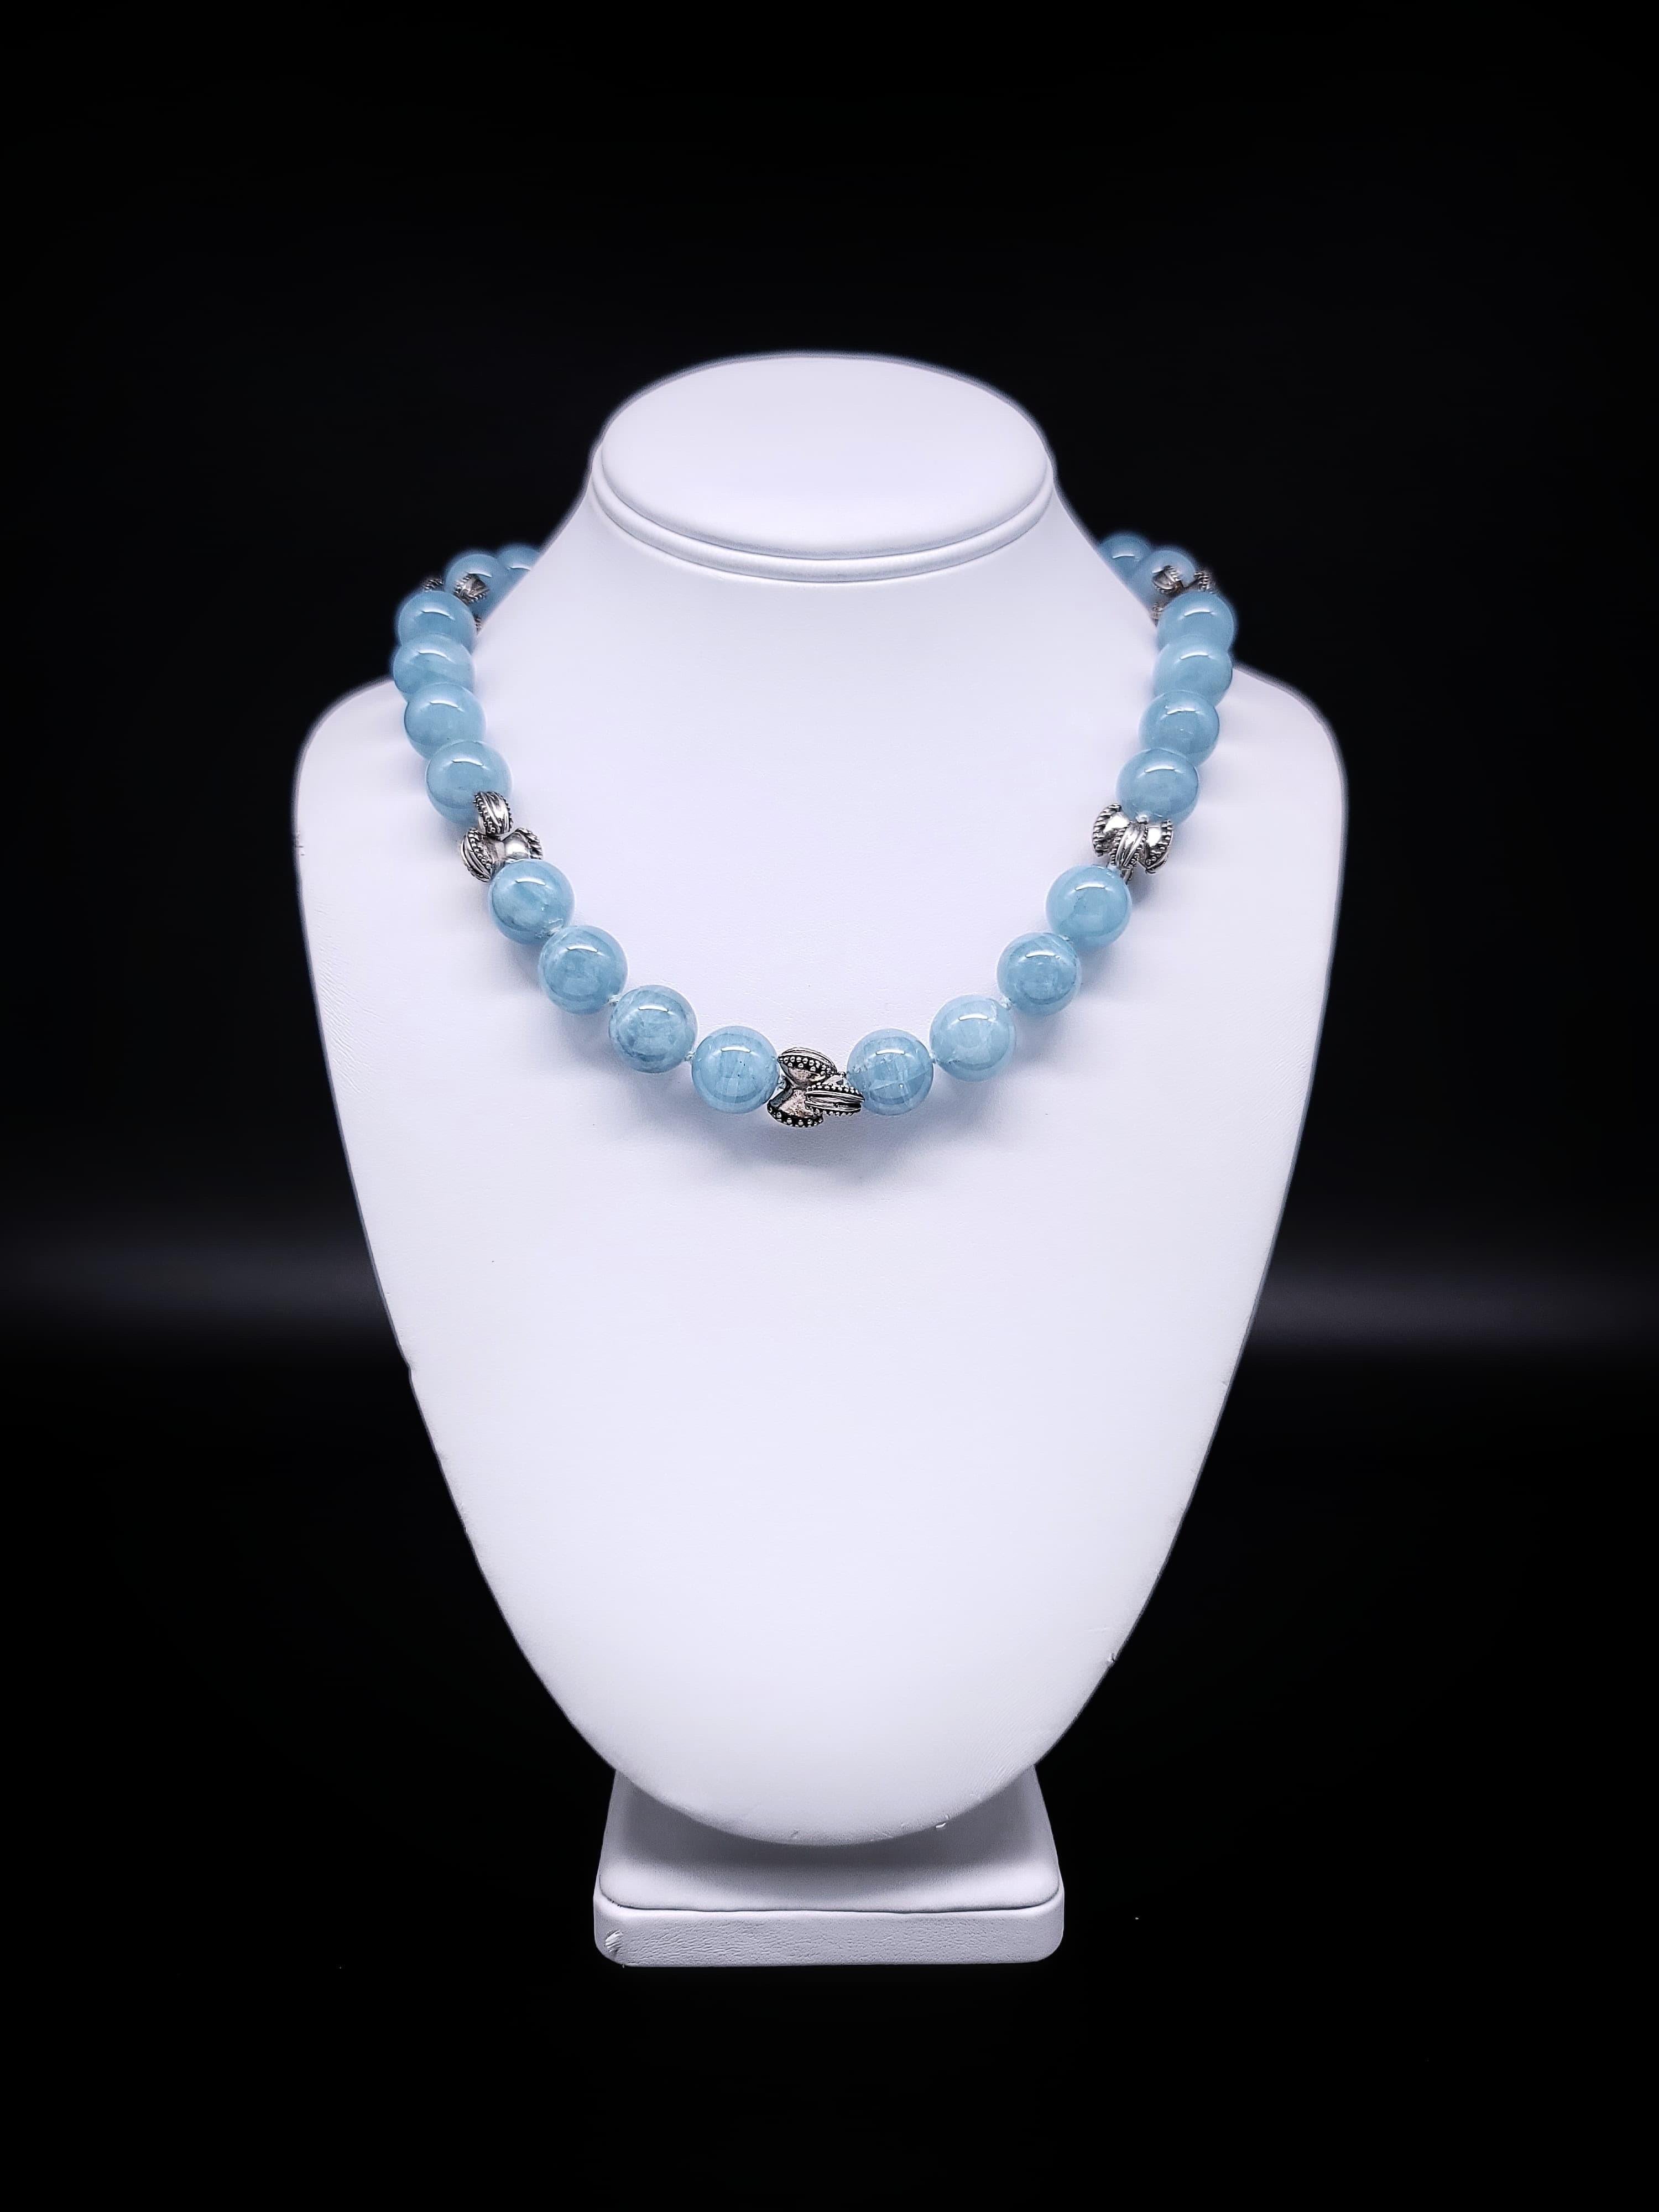 One-of-a-Kind

Perfectly matched 14mm polished Aquamarine beads interspersed with hand-crafted Sterling Silver love knots. The clasp is a  gleaming abalone disc set into silver.
Silk hand-knotted
Approx: 18 inch
